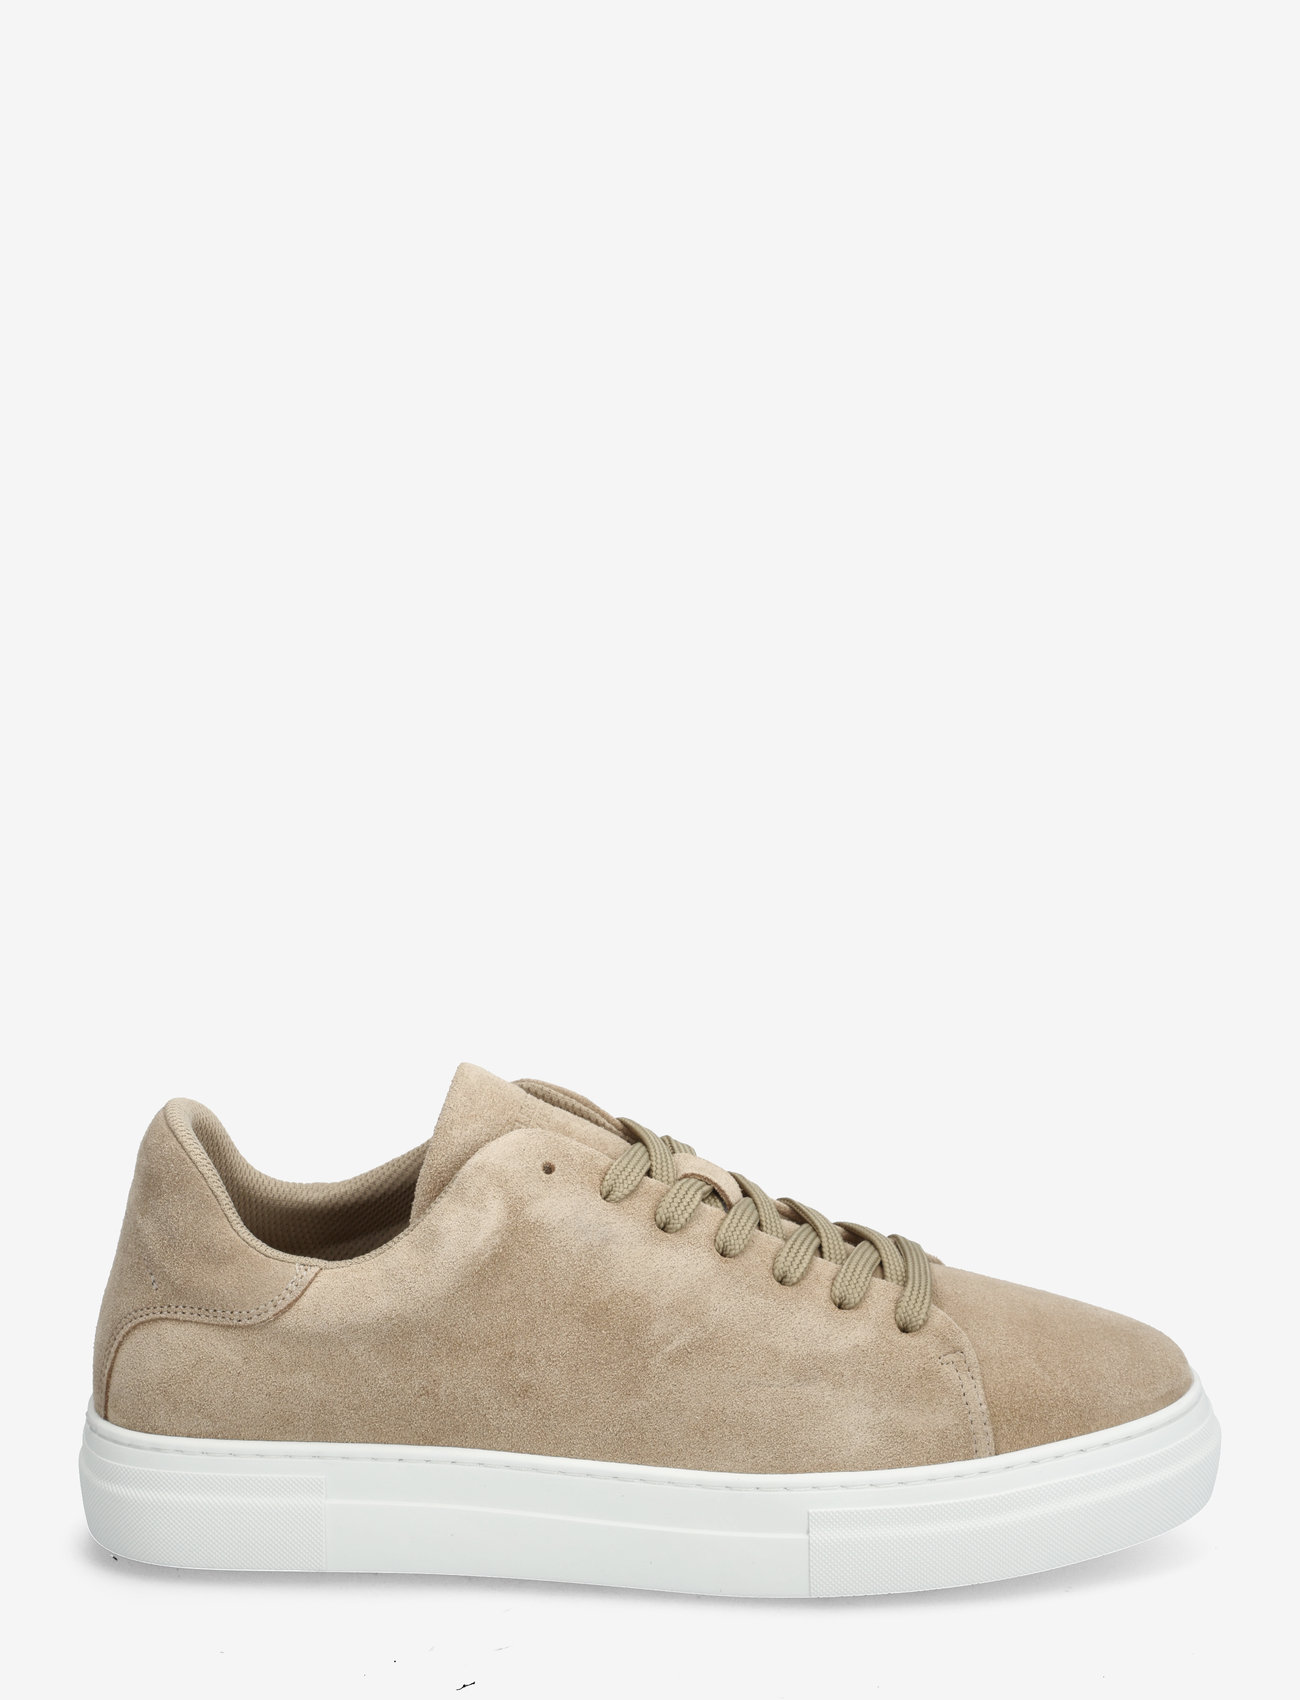 Selected Homme - SLHDAVID CHUNKY CLEAN SUEDE TRAINER B - przed kostkę - sand - 1